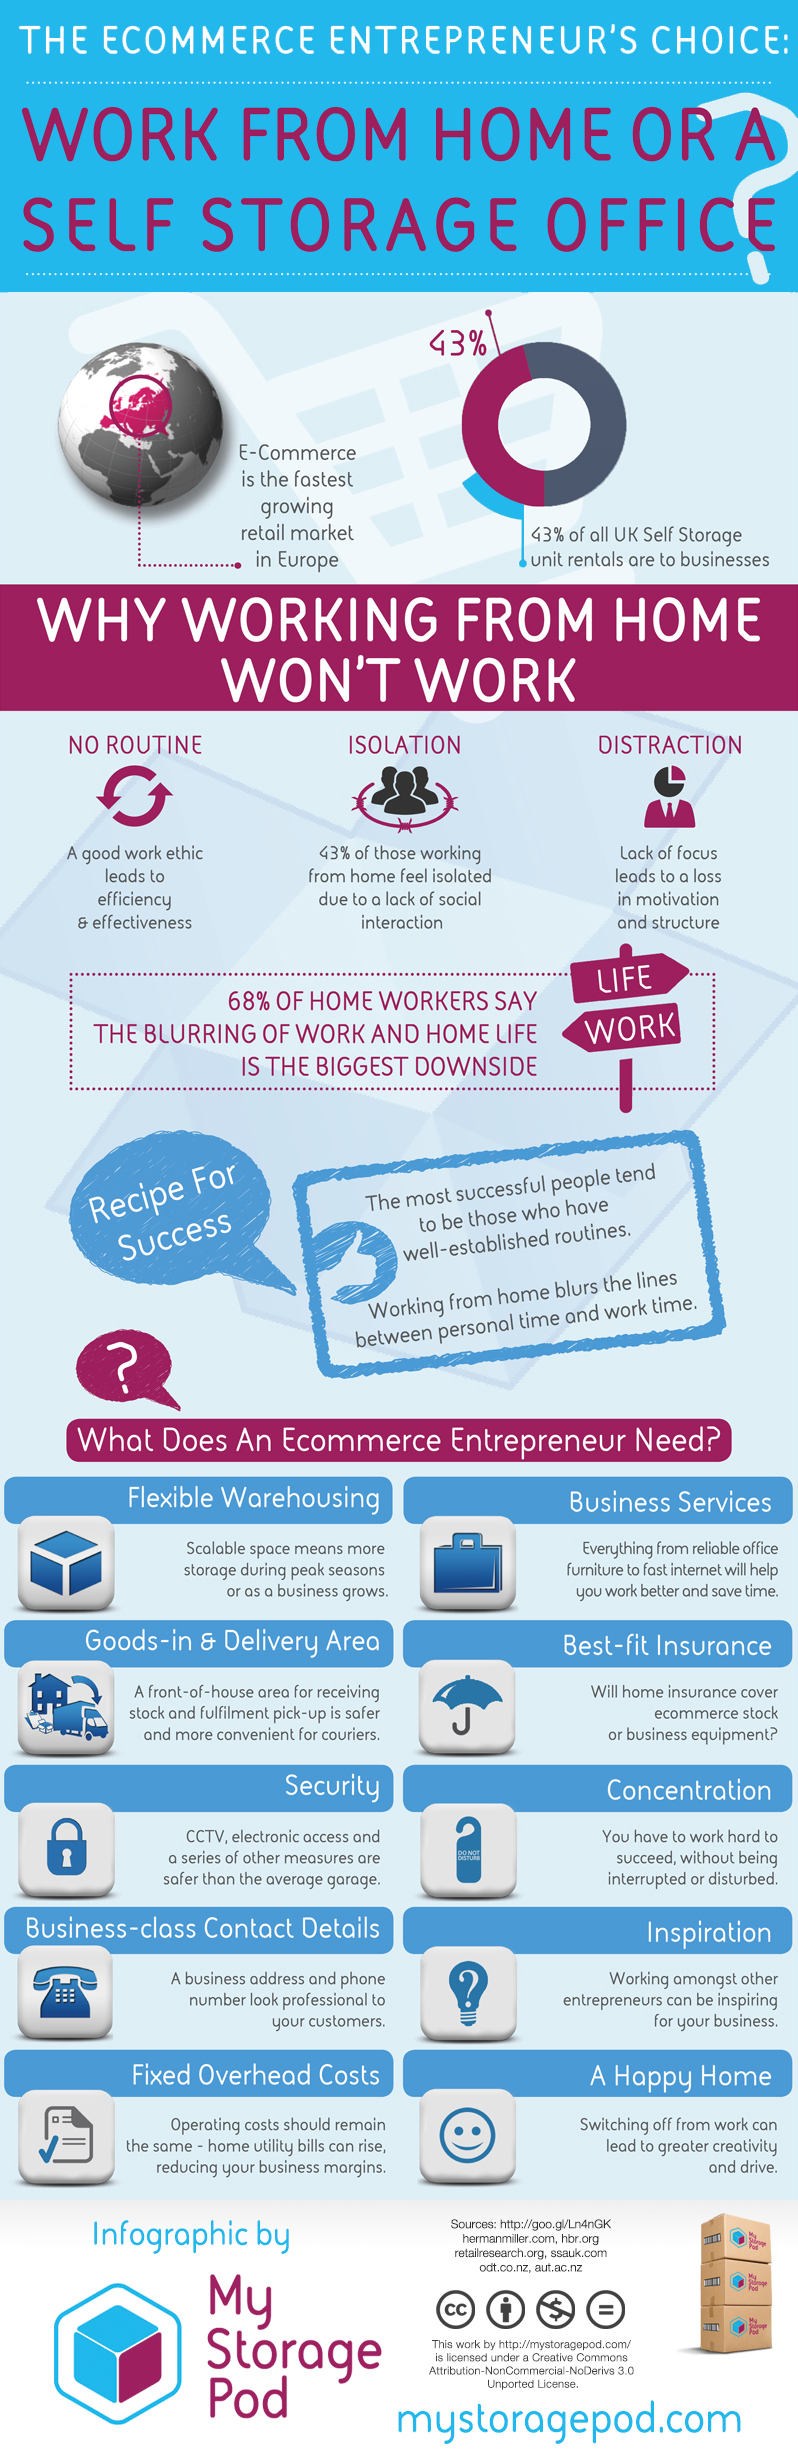 Infographic: The Ecommerce Entrepreneur's Choice: Work from home or a self storage office?